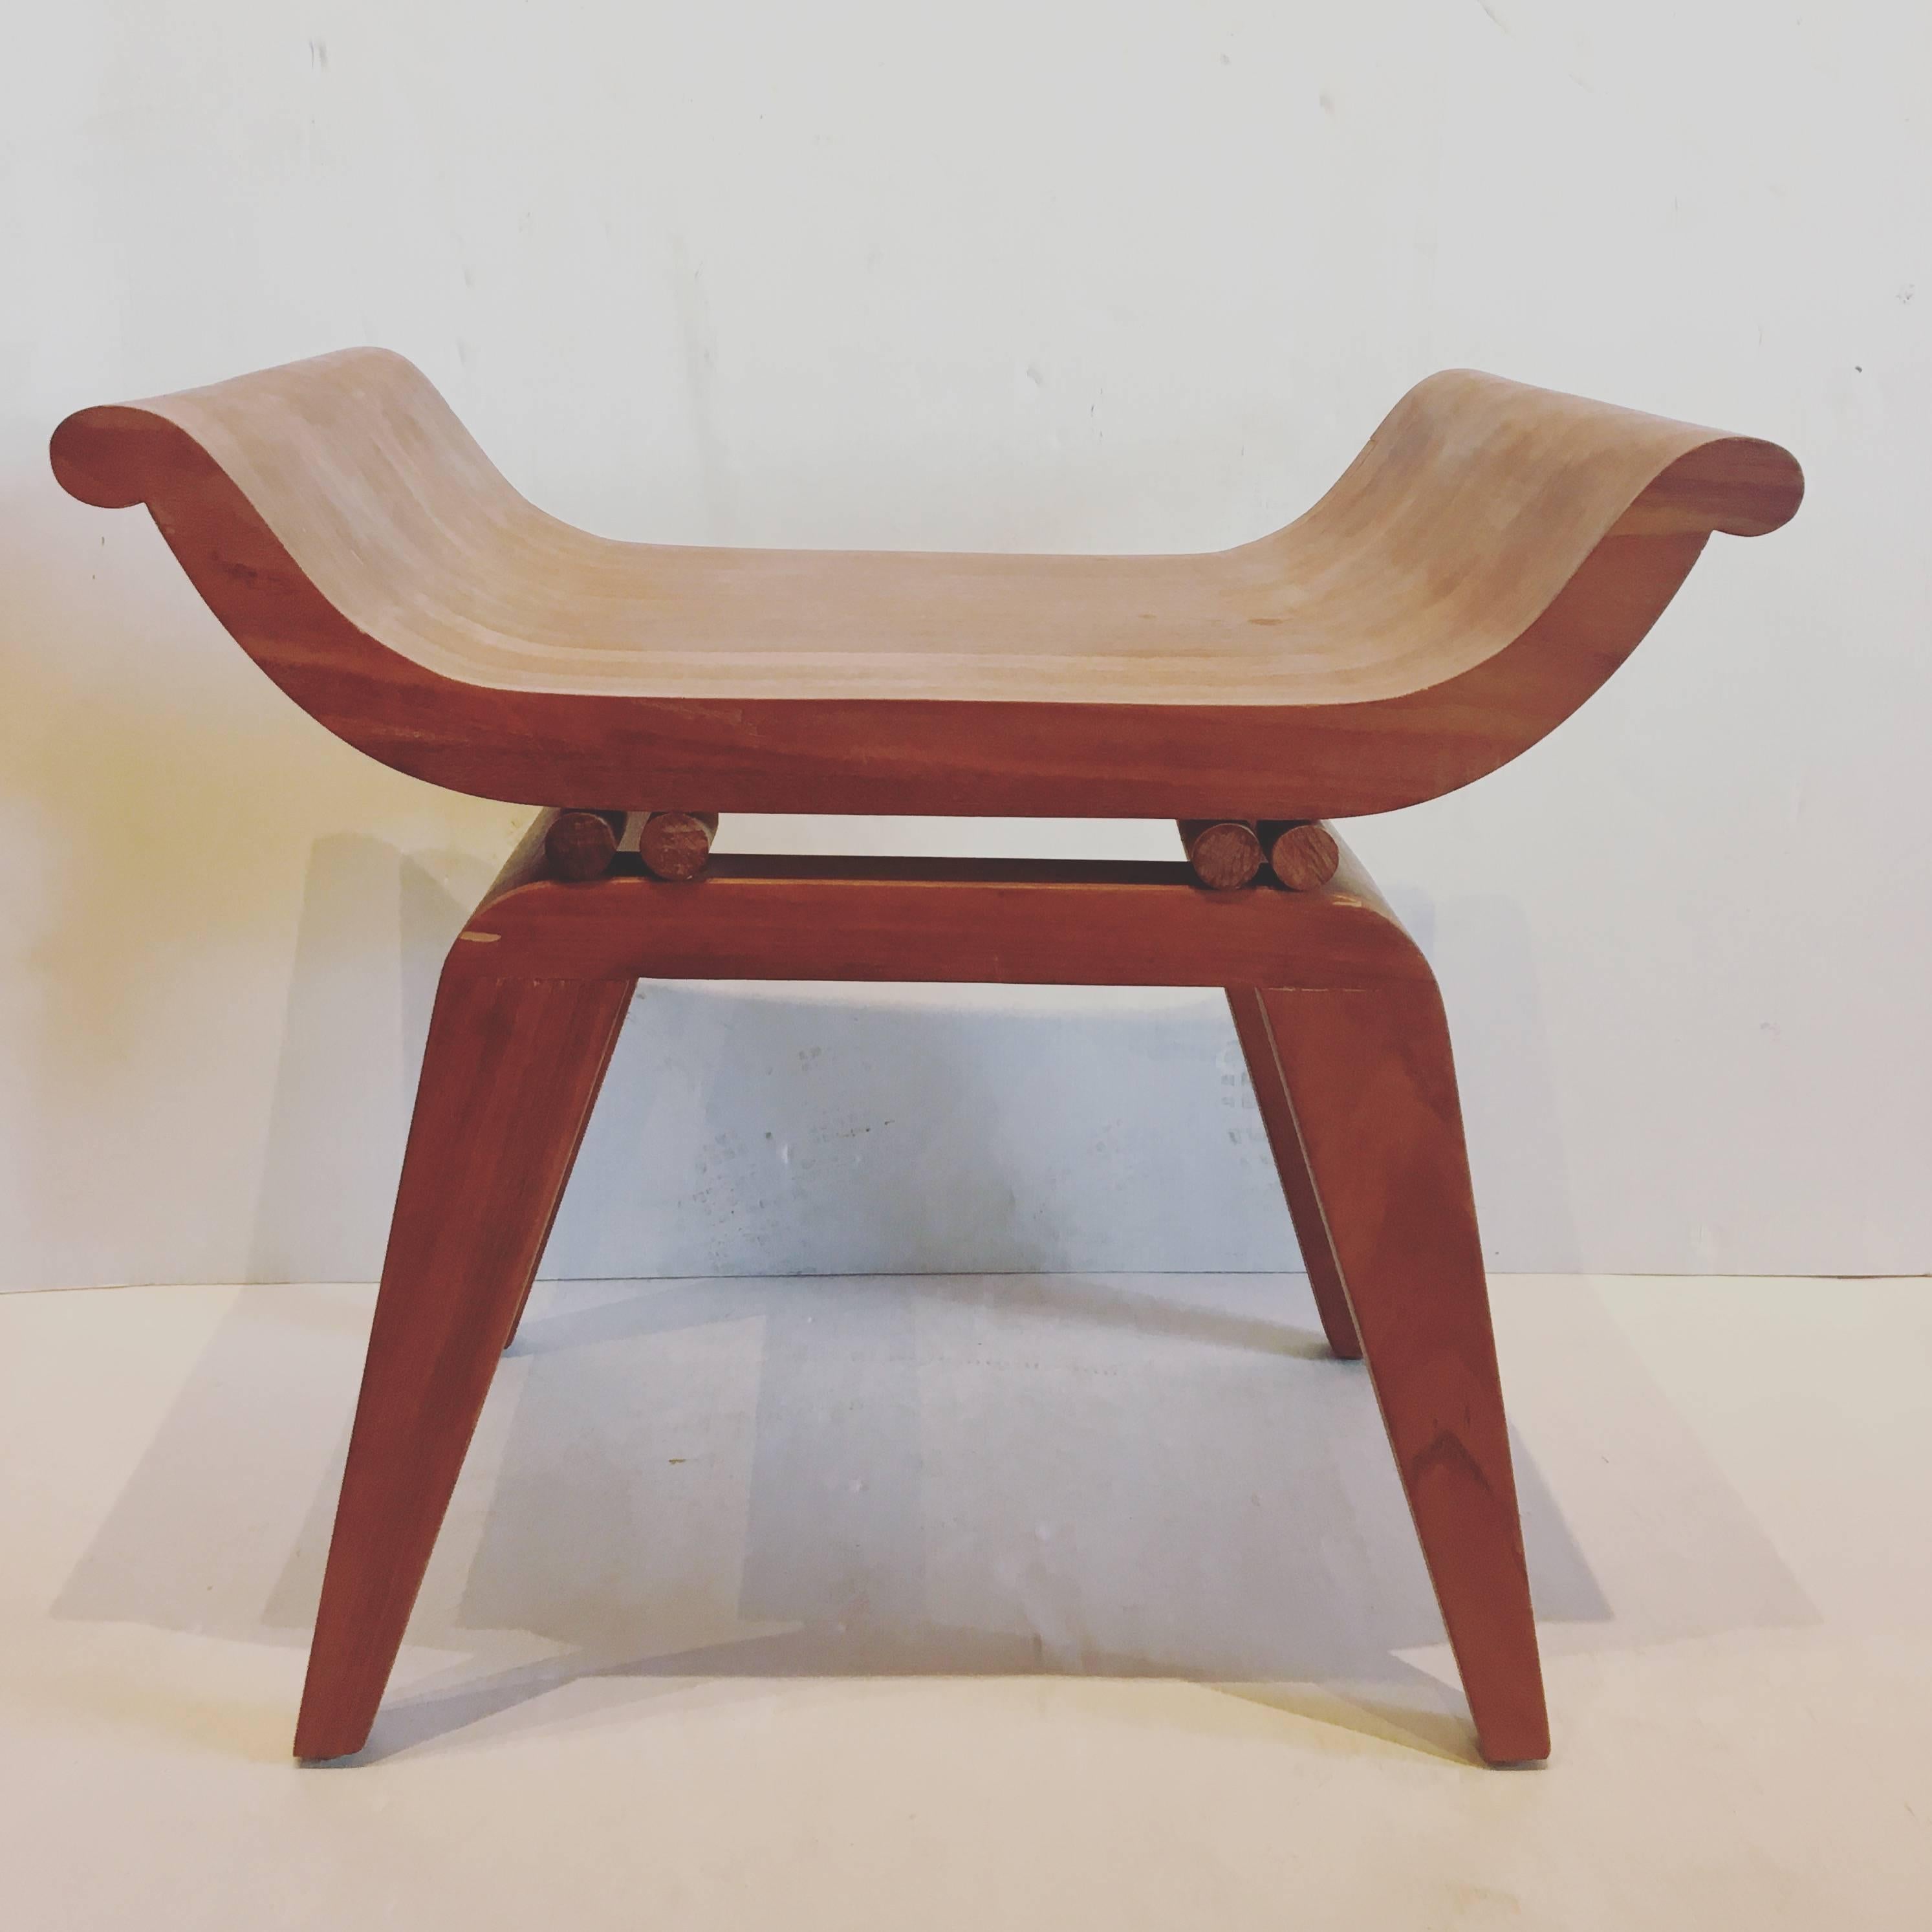 20th Century Rare Neoclassical Mexican Modern Solid Mahogany Stool or Bench